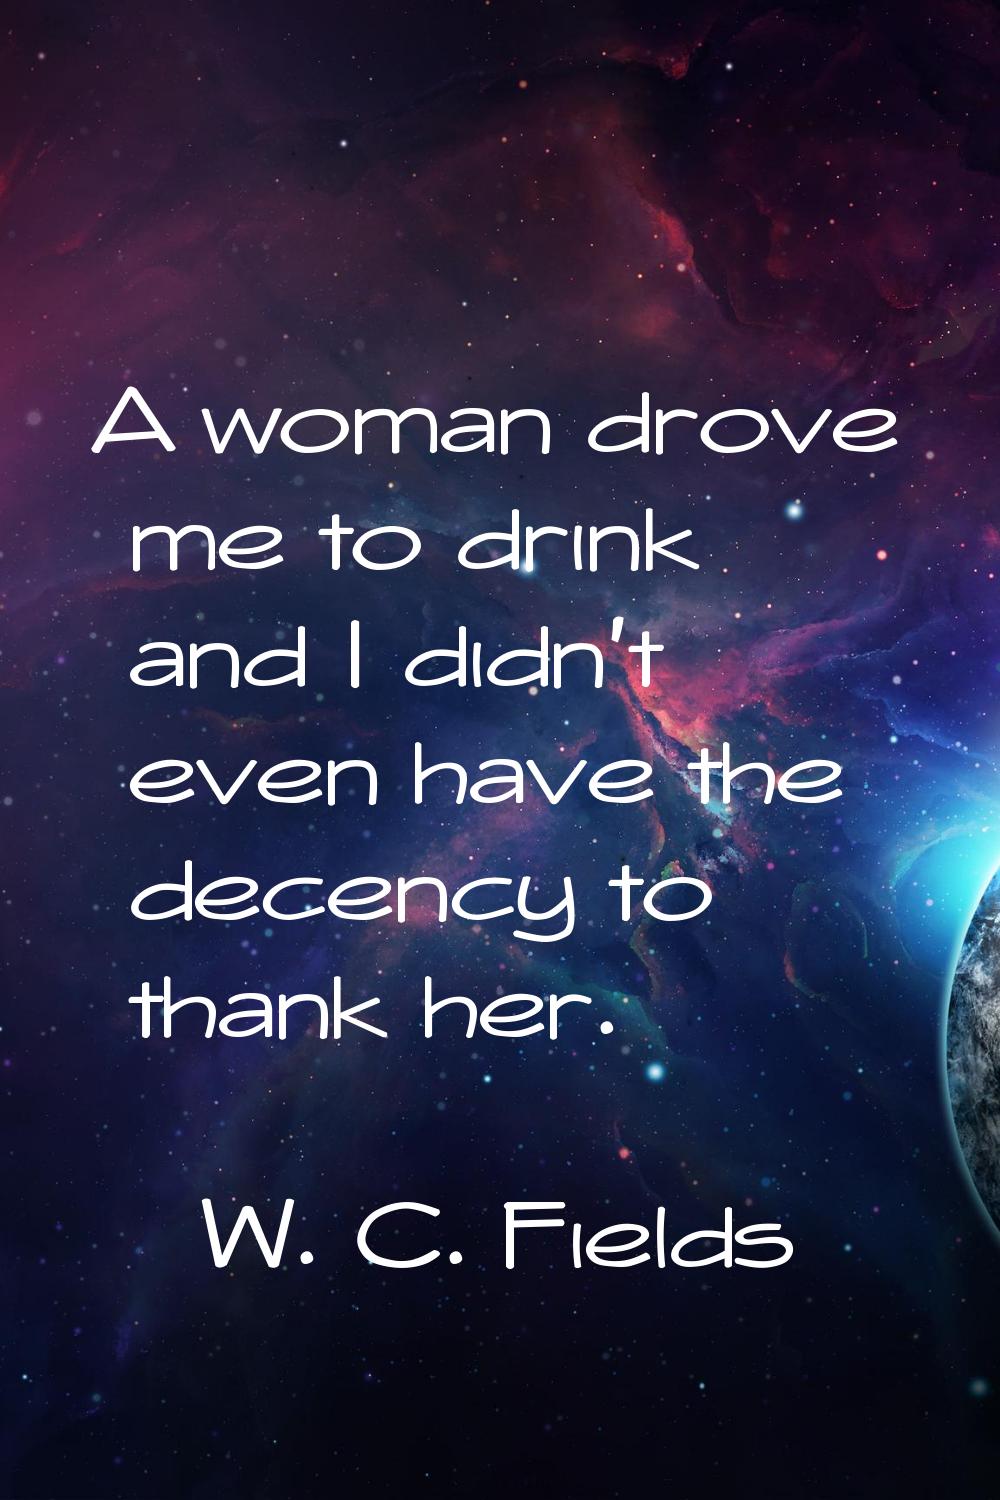 A woman drove me to drink and I didn't even have the decency to thank her.